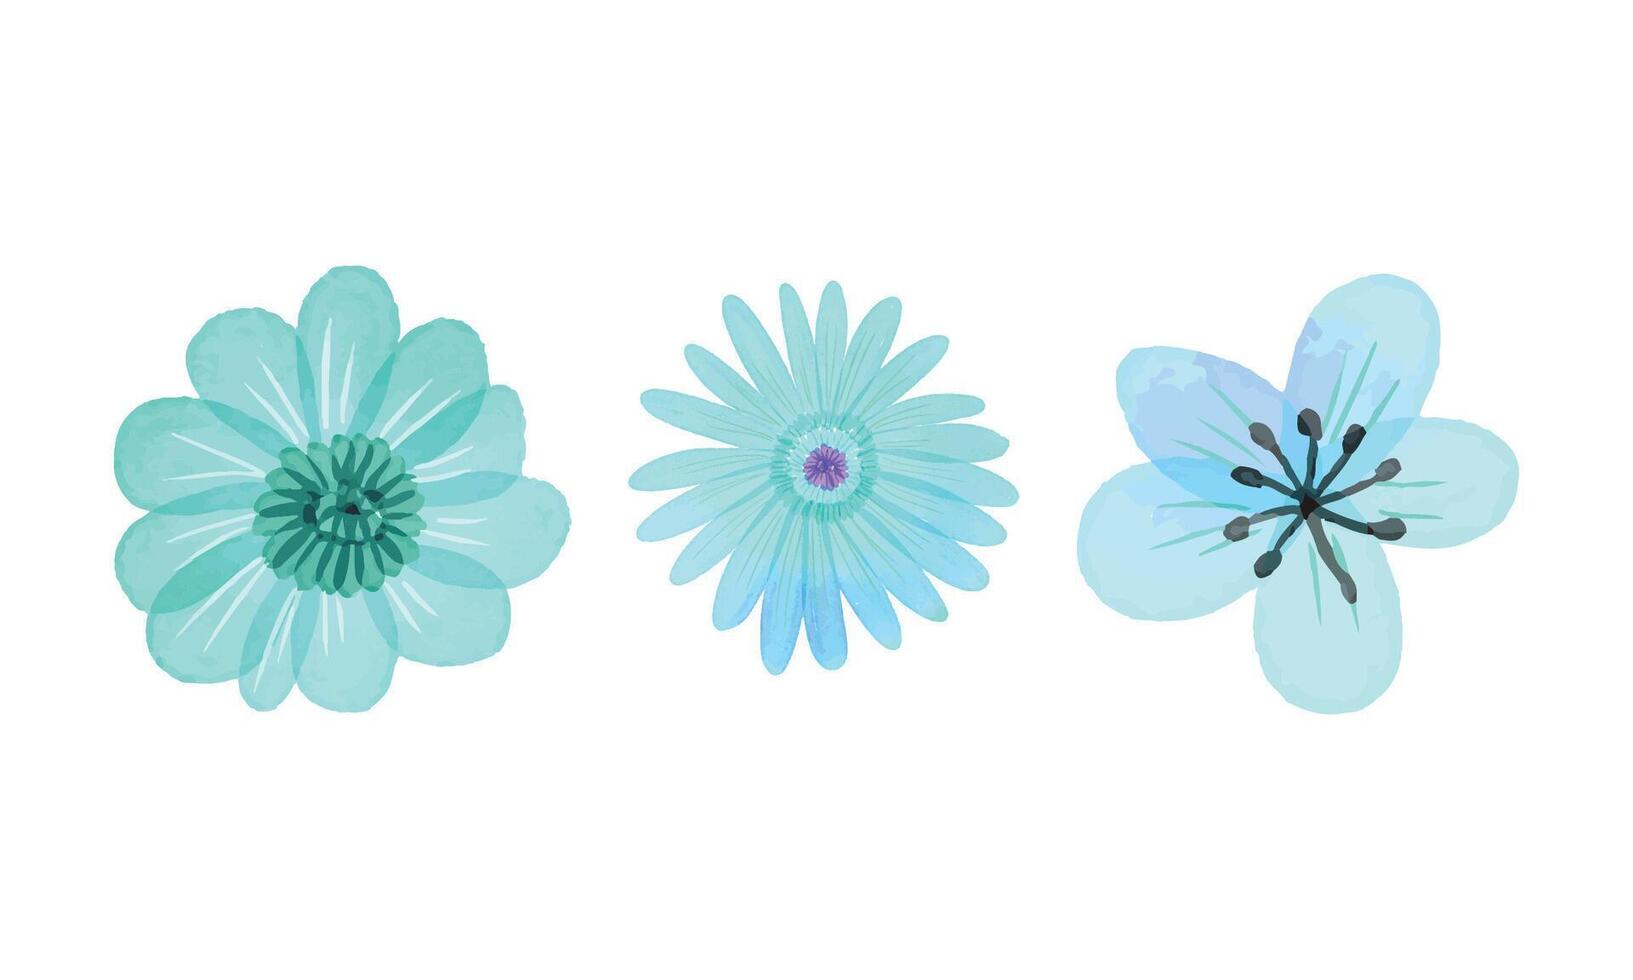 Watercolor flowers collection on white background vector